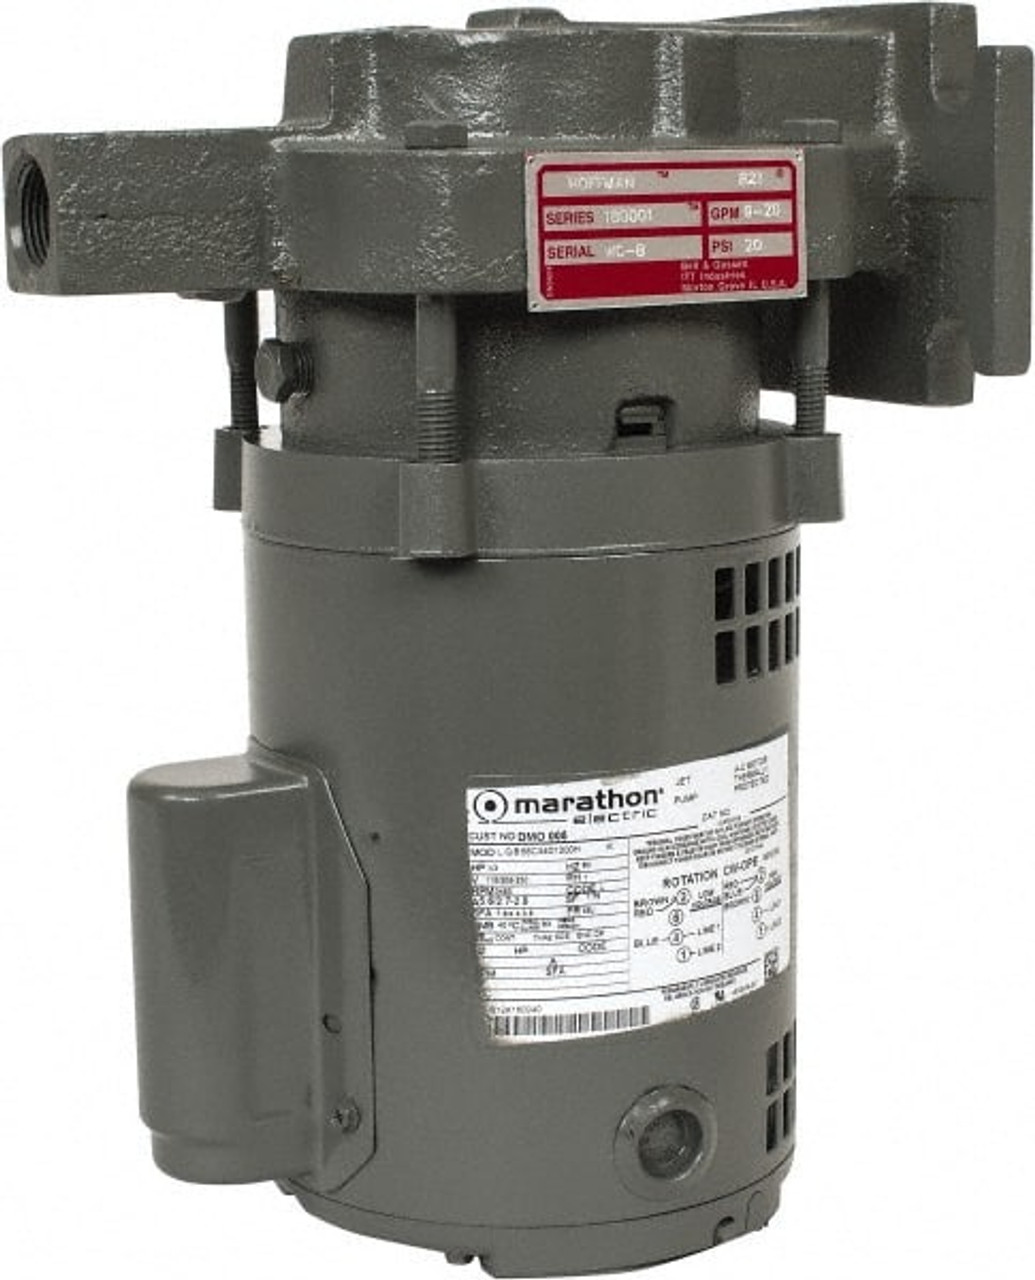 Bell & Gossett 115/230 V, Condensate Pump Replacement Pump and Motor For  Use With 609PF and ITT Hoffman Watchman Series WC Condensate Units 180001 -  07499825 - Penn Tool Co., Inc